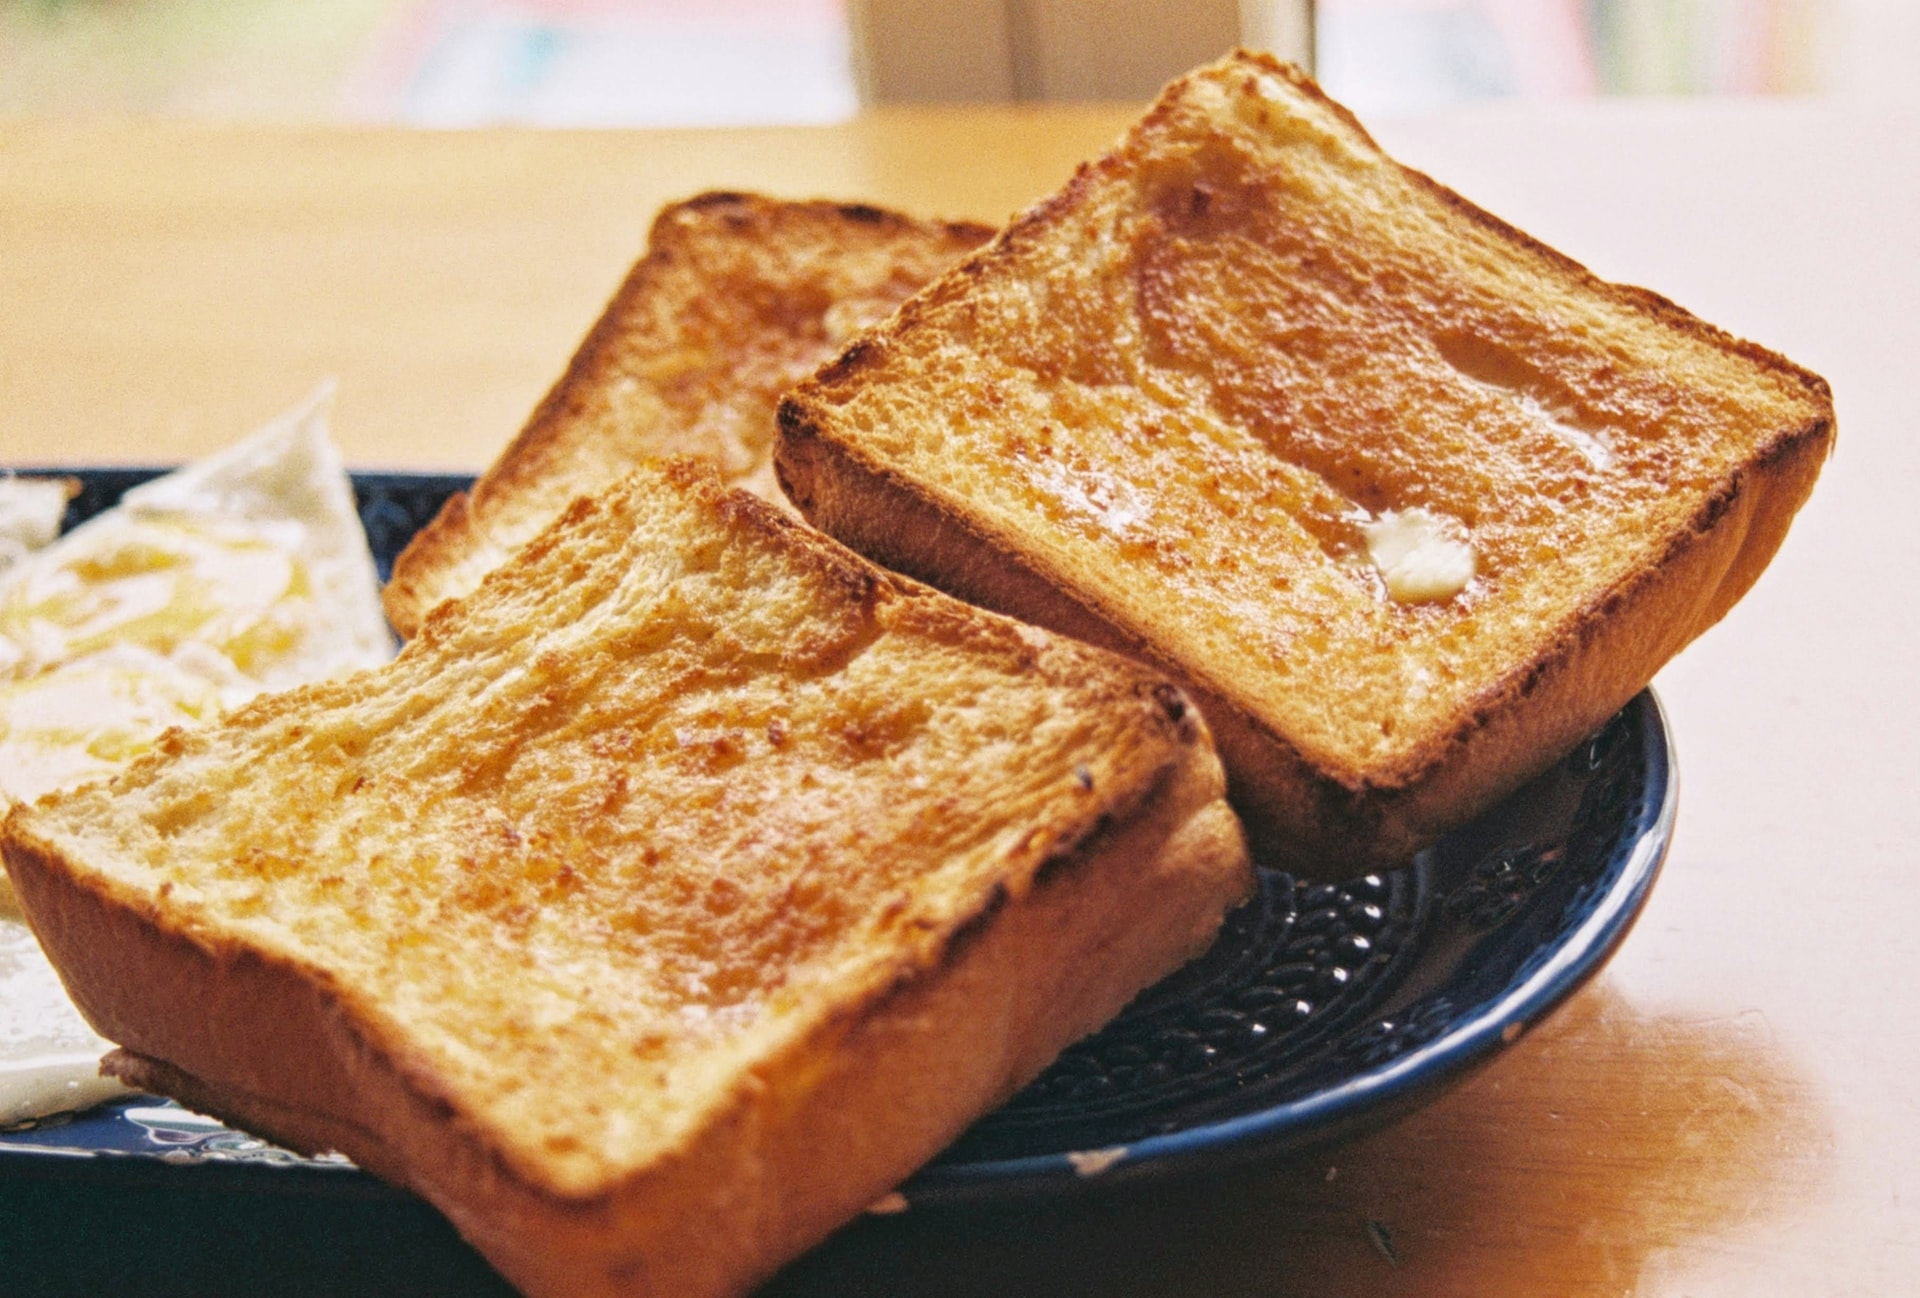 How to make French Toast?